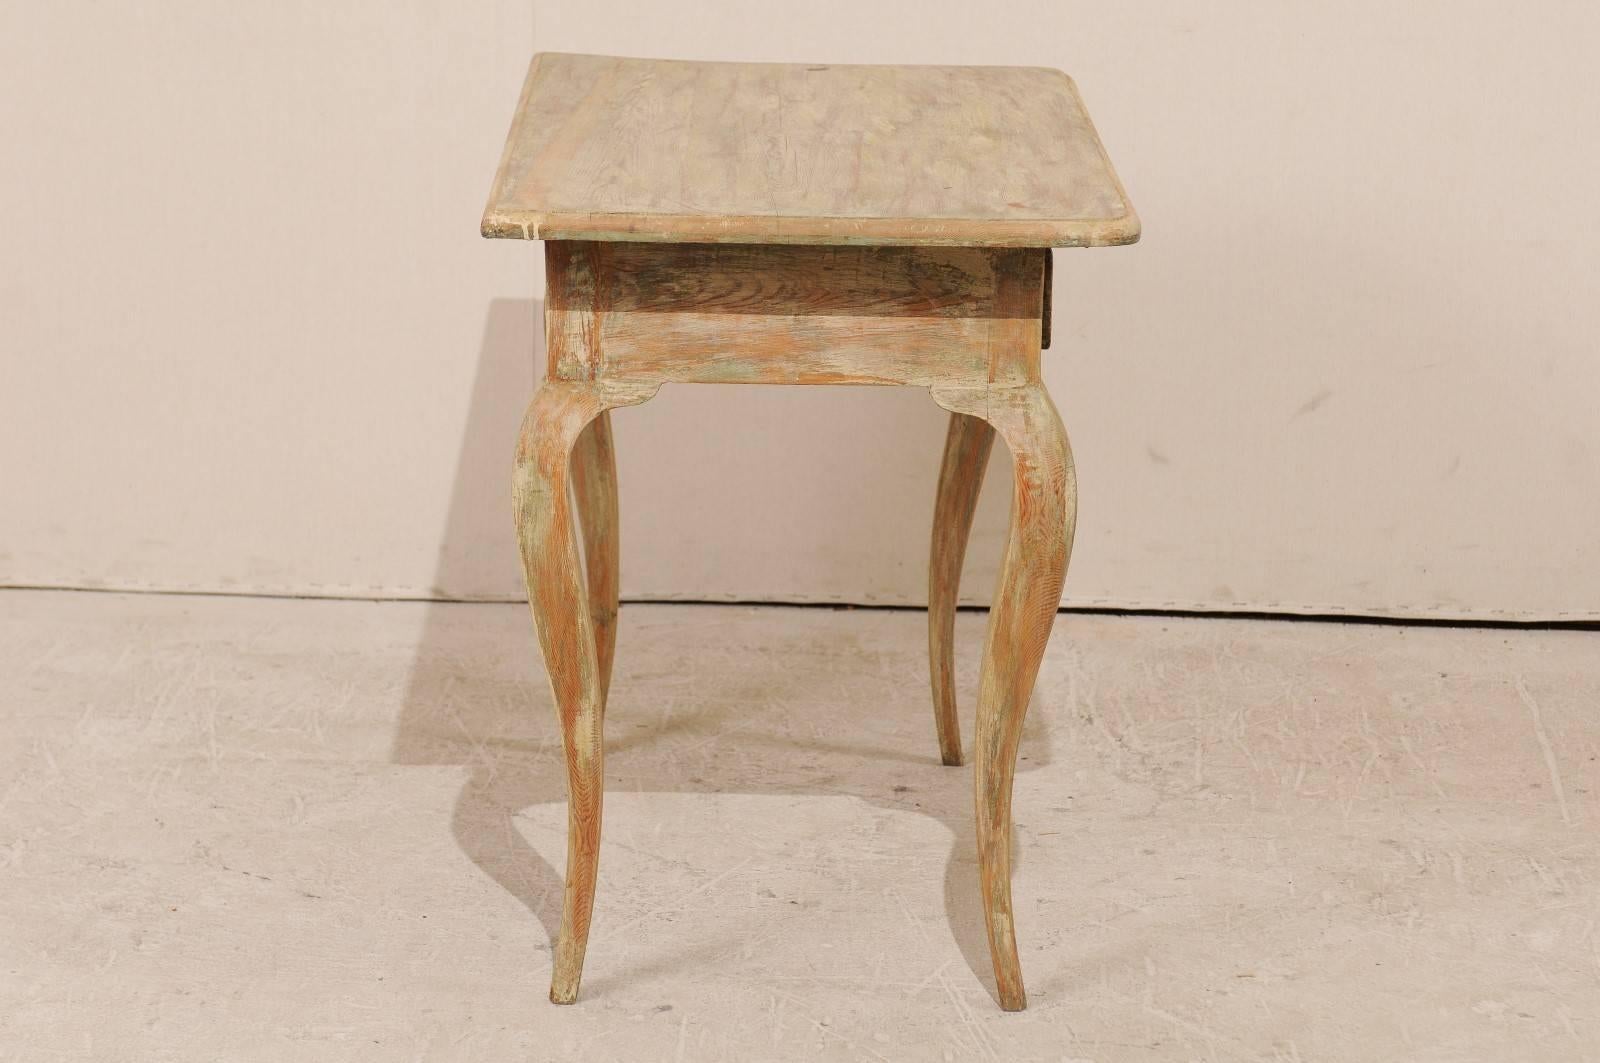 18th Century and Earlier Period Rococo Painted Wood Side Table from the 18th Century with Cabriole Legs